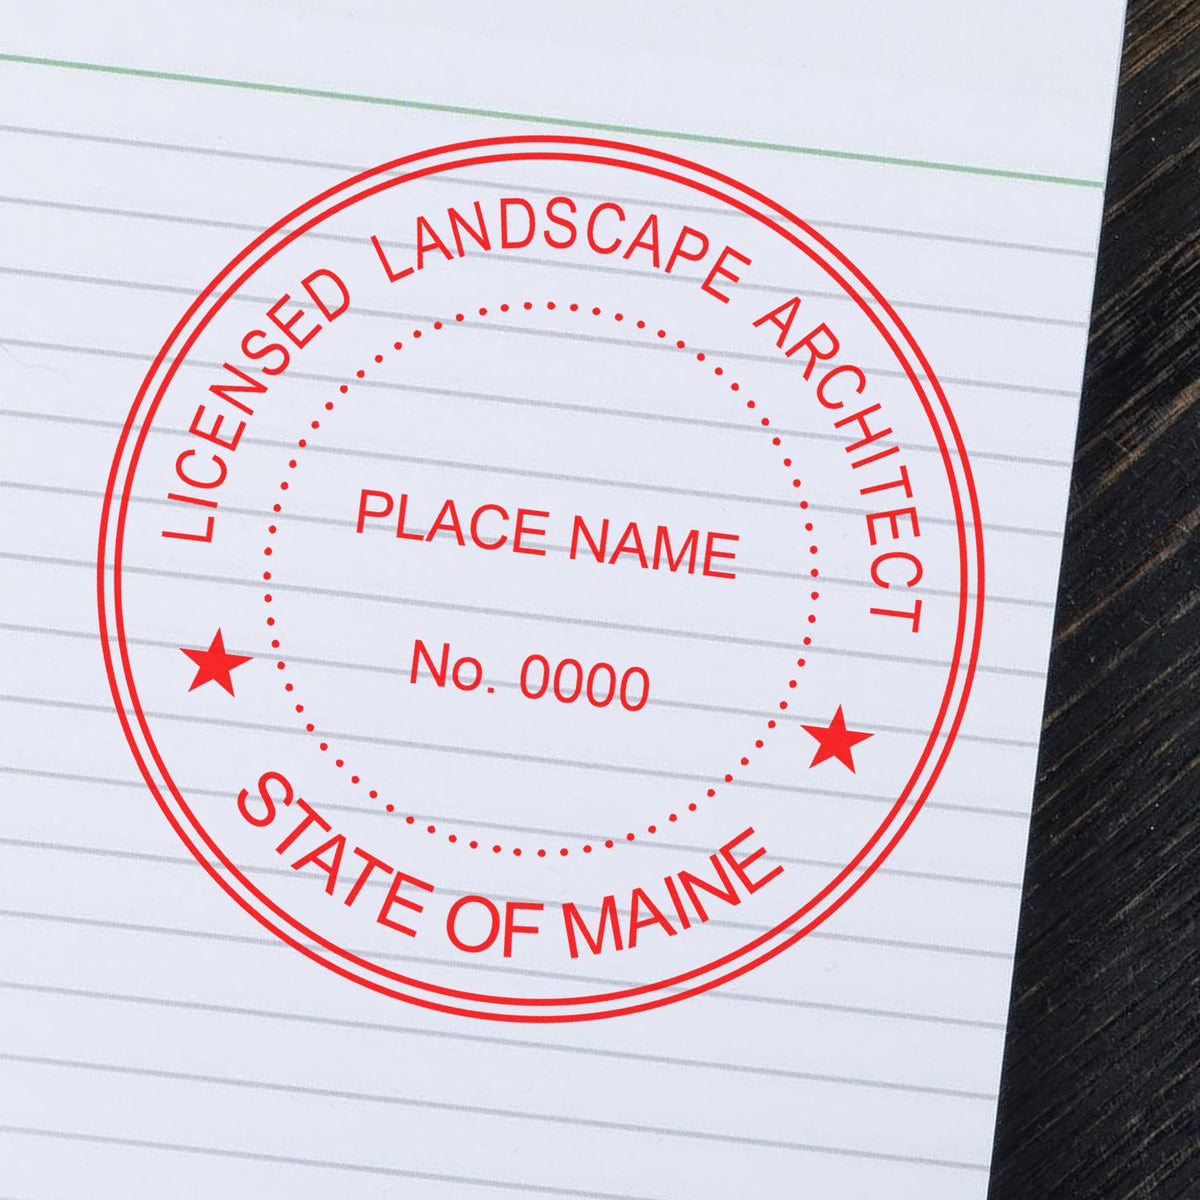 A stamped impression of the Self-Inking Maine Landscape Architect Stamp in this stylish lifestyle photo, setting the tone for a unique and personalized product.